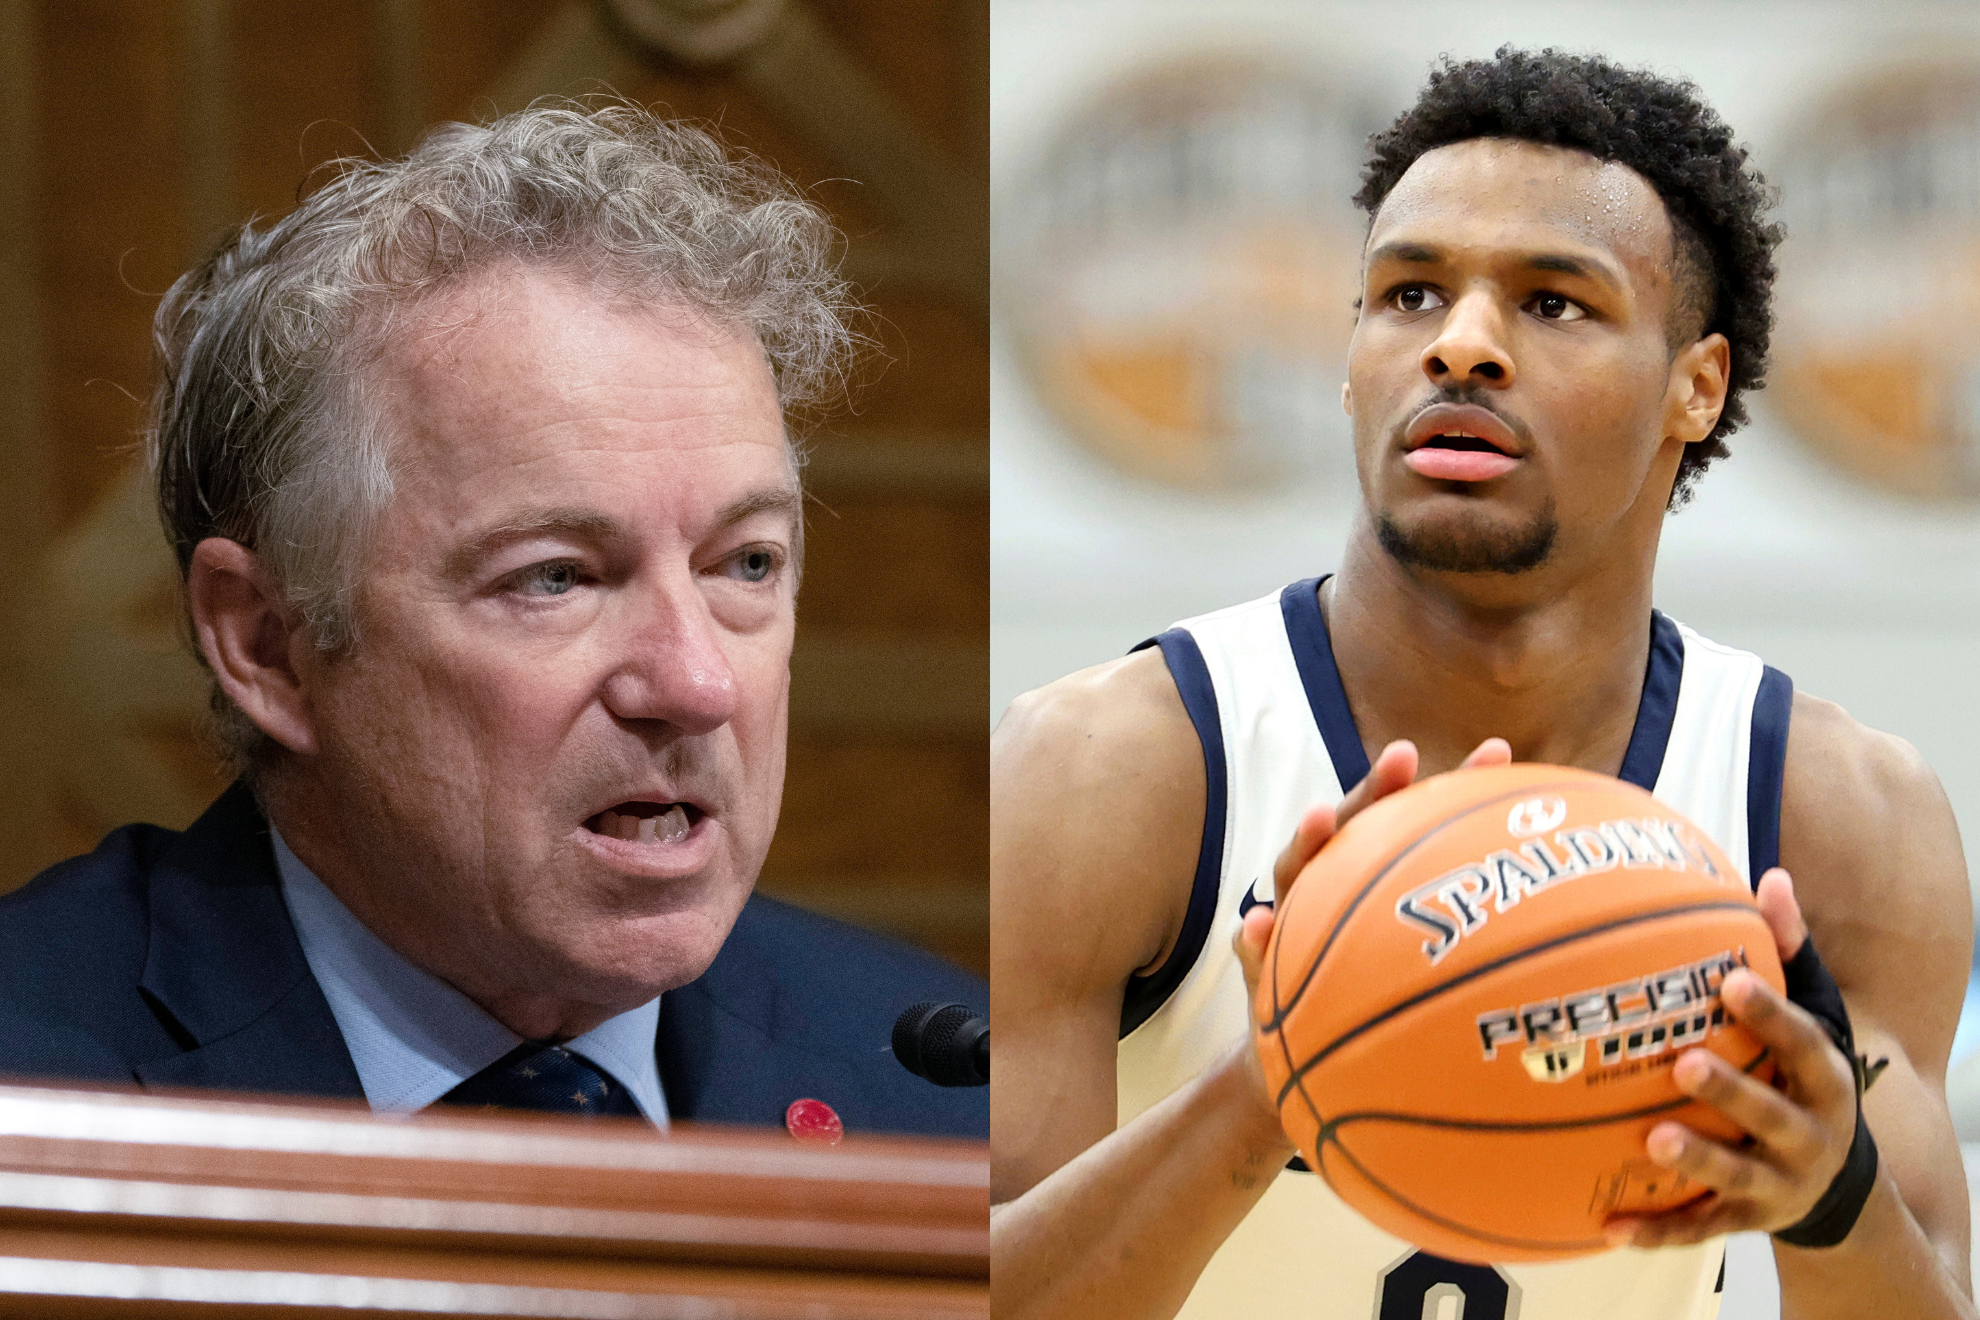 Rand Paul (L) appears to be a future rival of athletes like Bronny James (R)